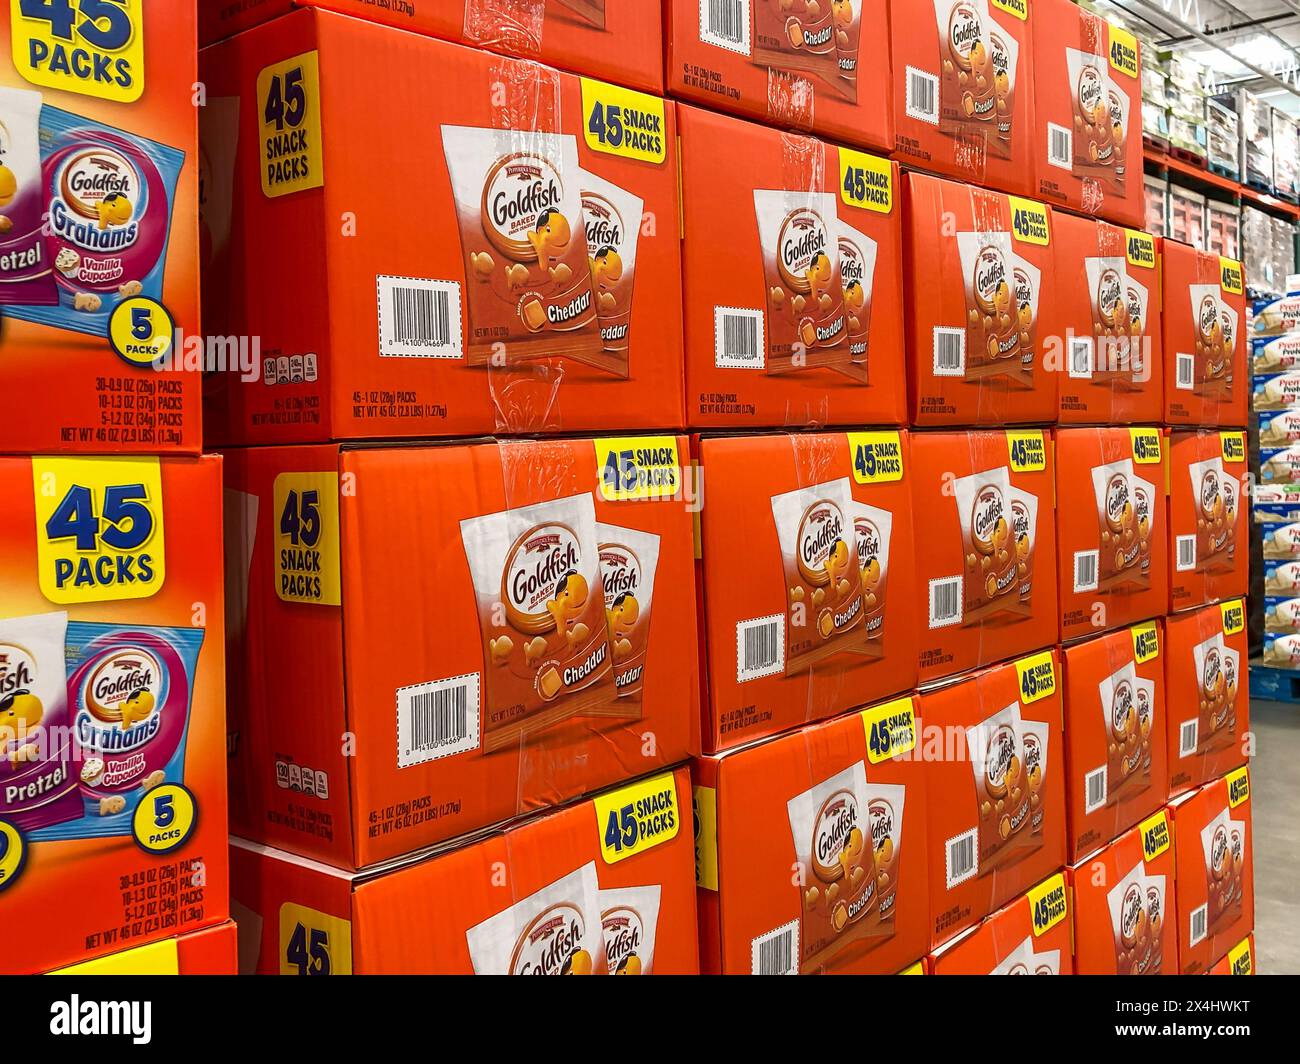 BAXTER, MN - 3 FEB 2021: Store display of boxes of Goldfish baked snack crackers. Pepperidge Farm is an American commercial bakery founded in 1937 Stock Photo